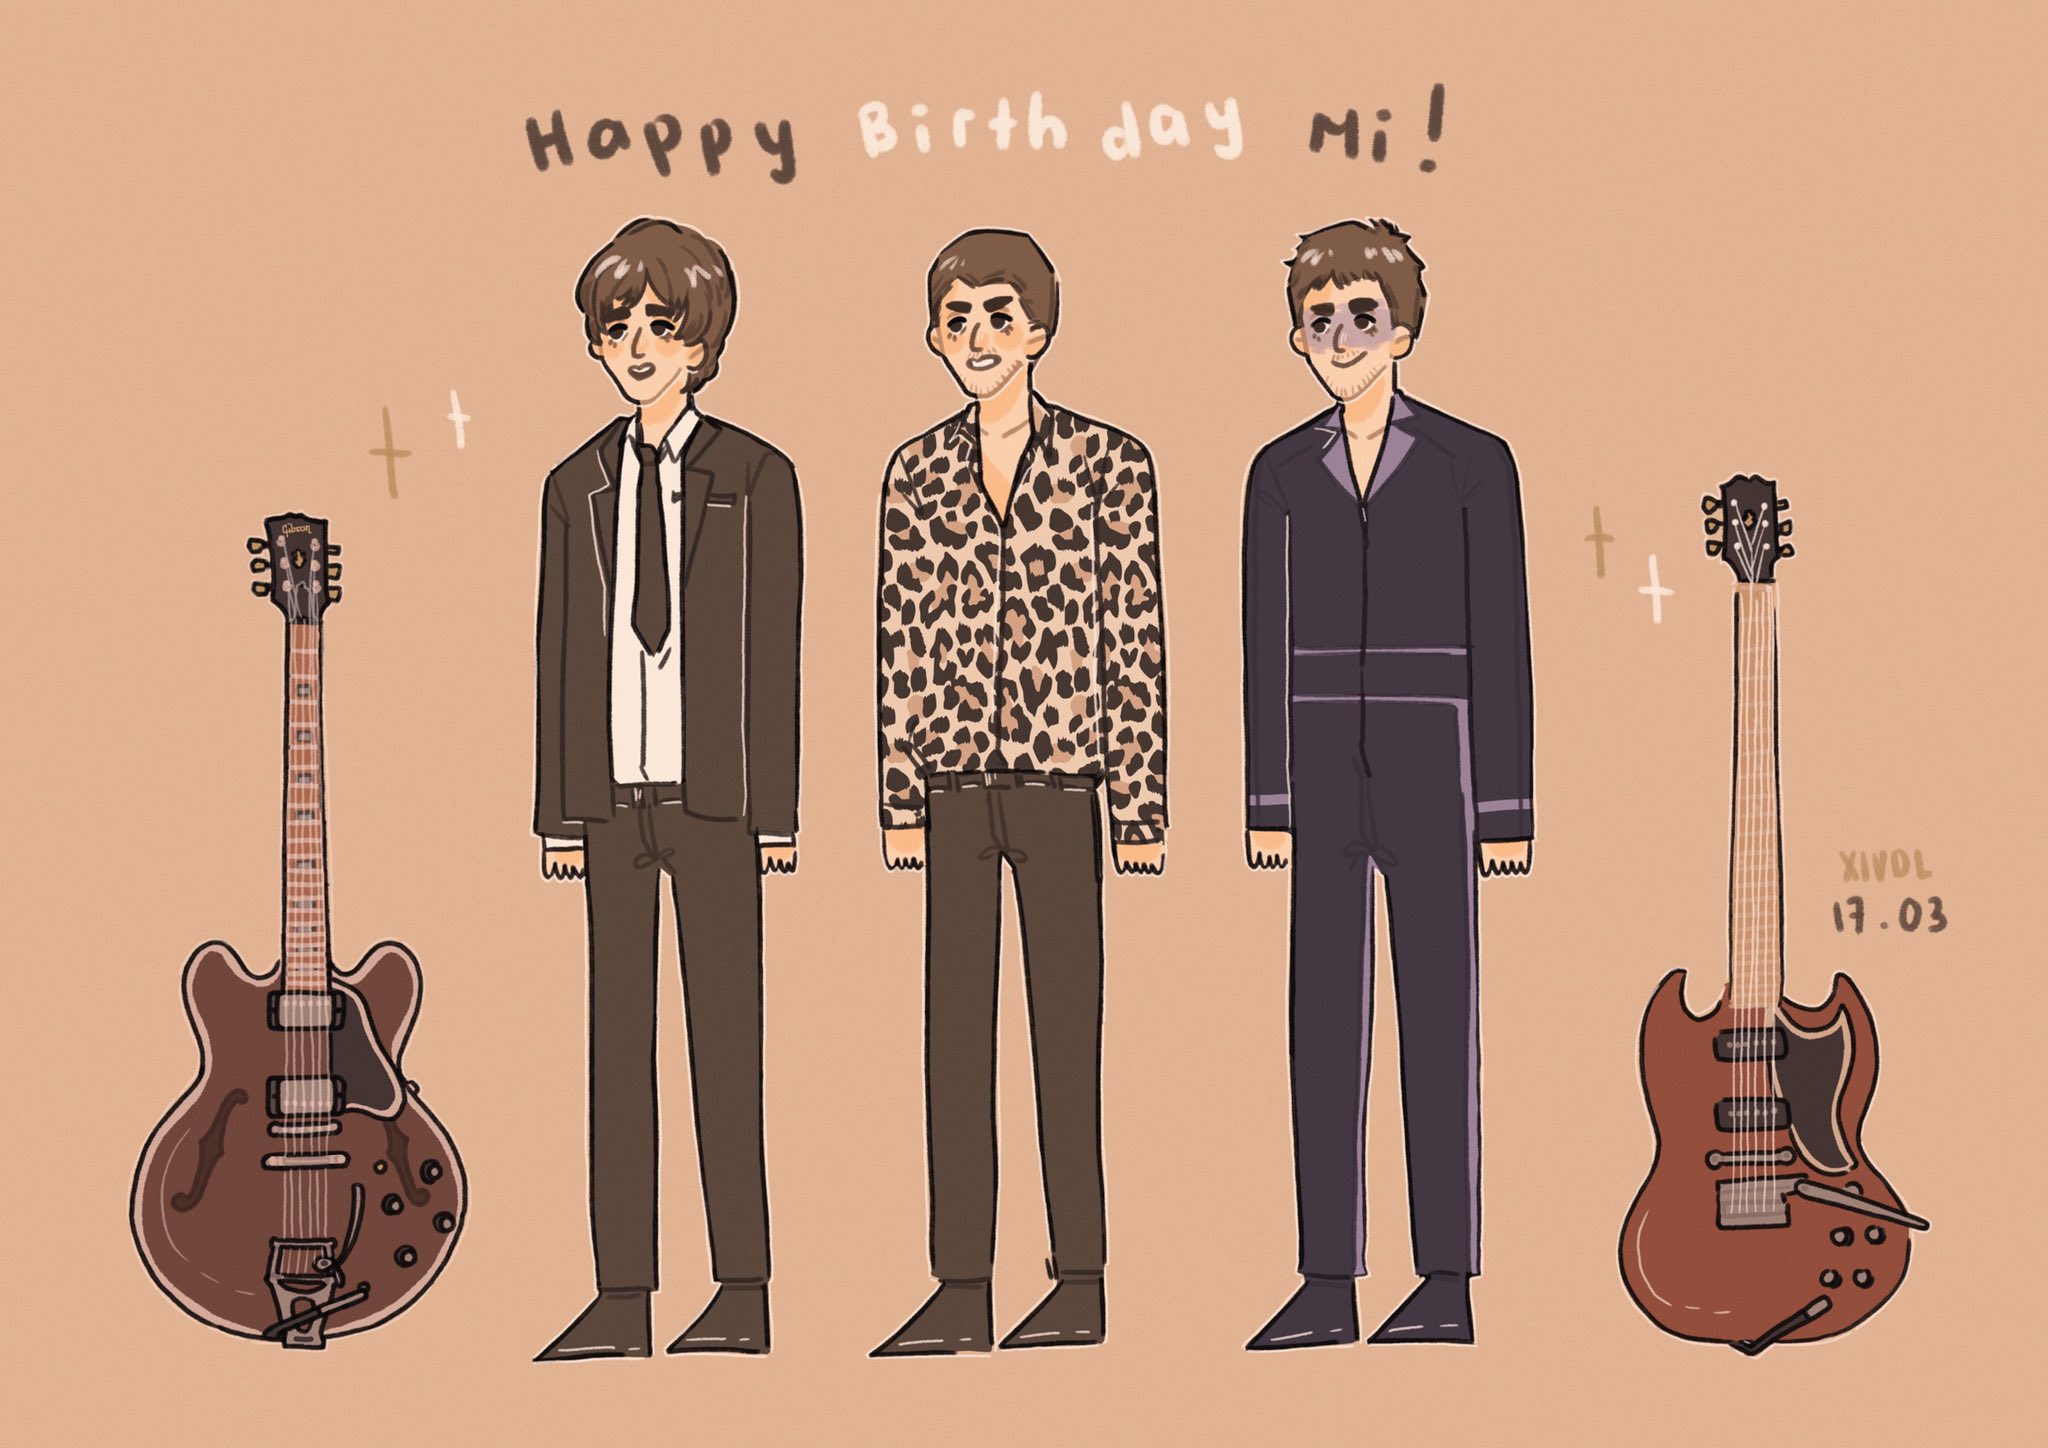  happy bday mr miles kane
hope you had a great one! 